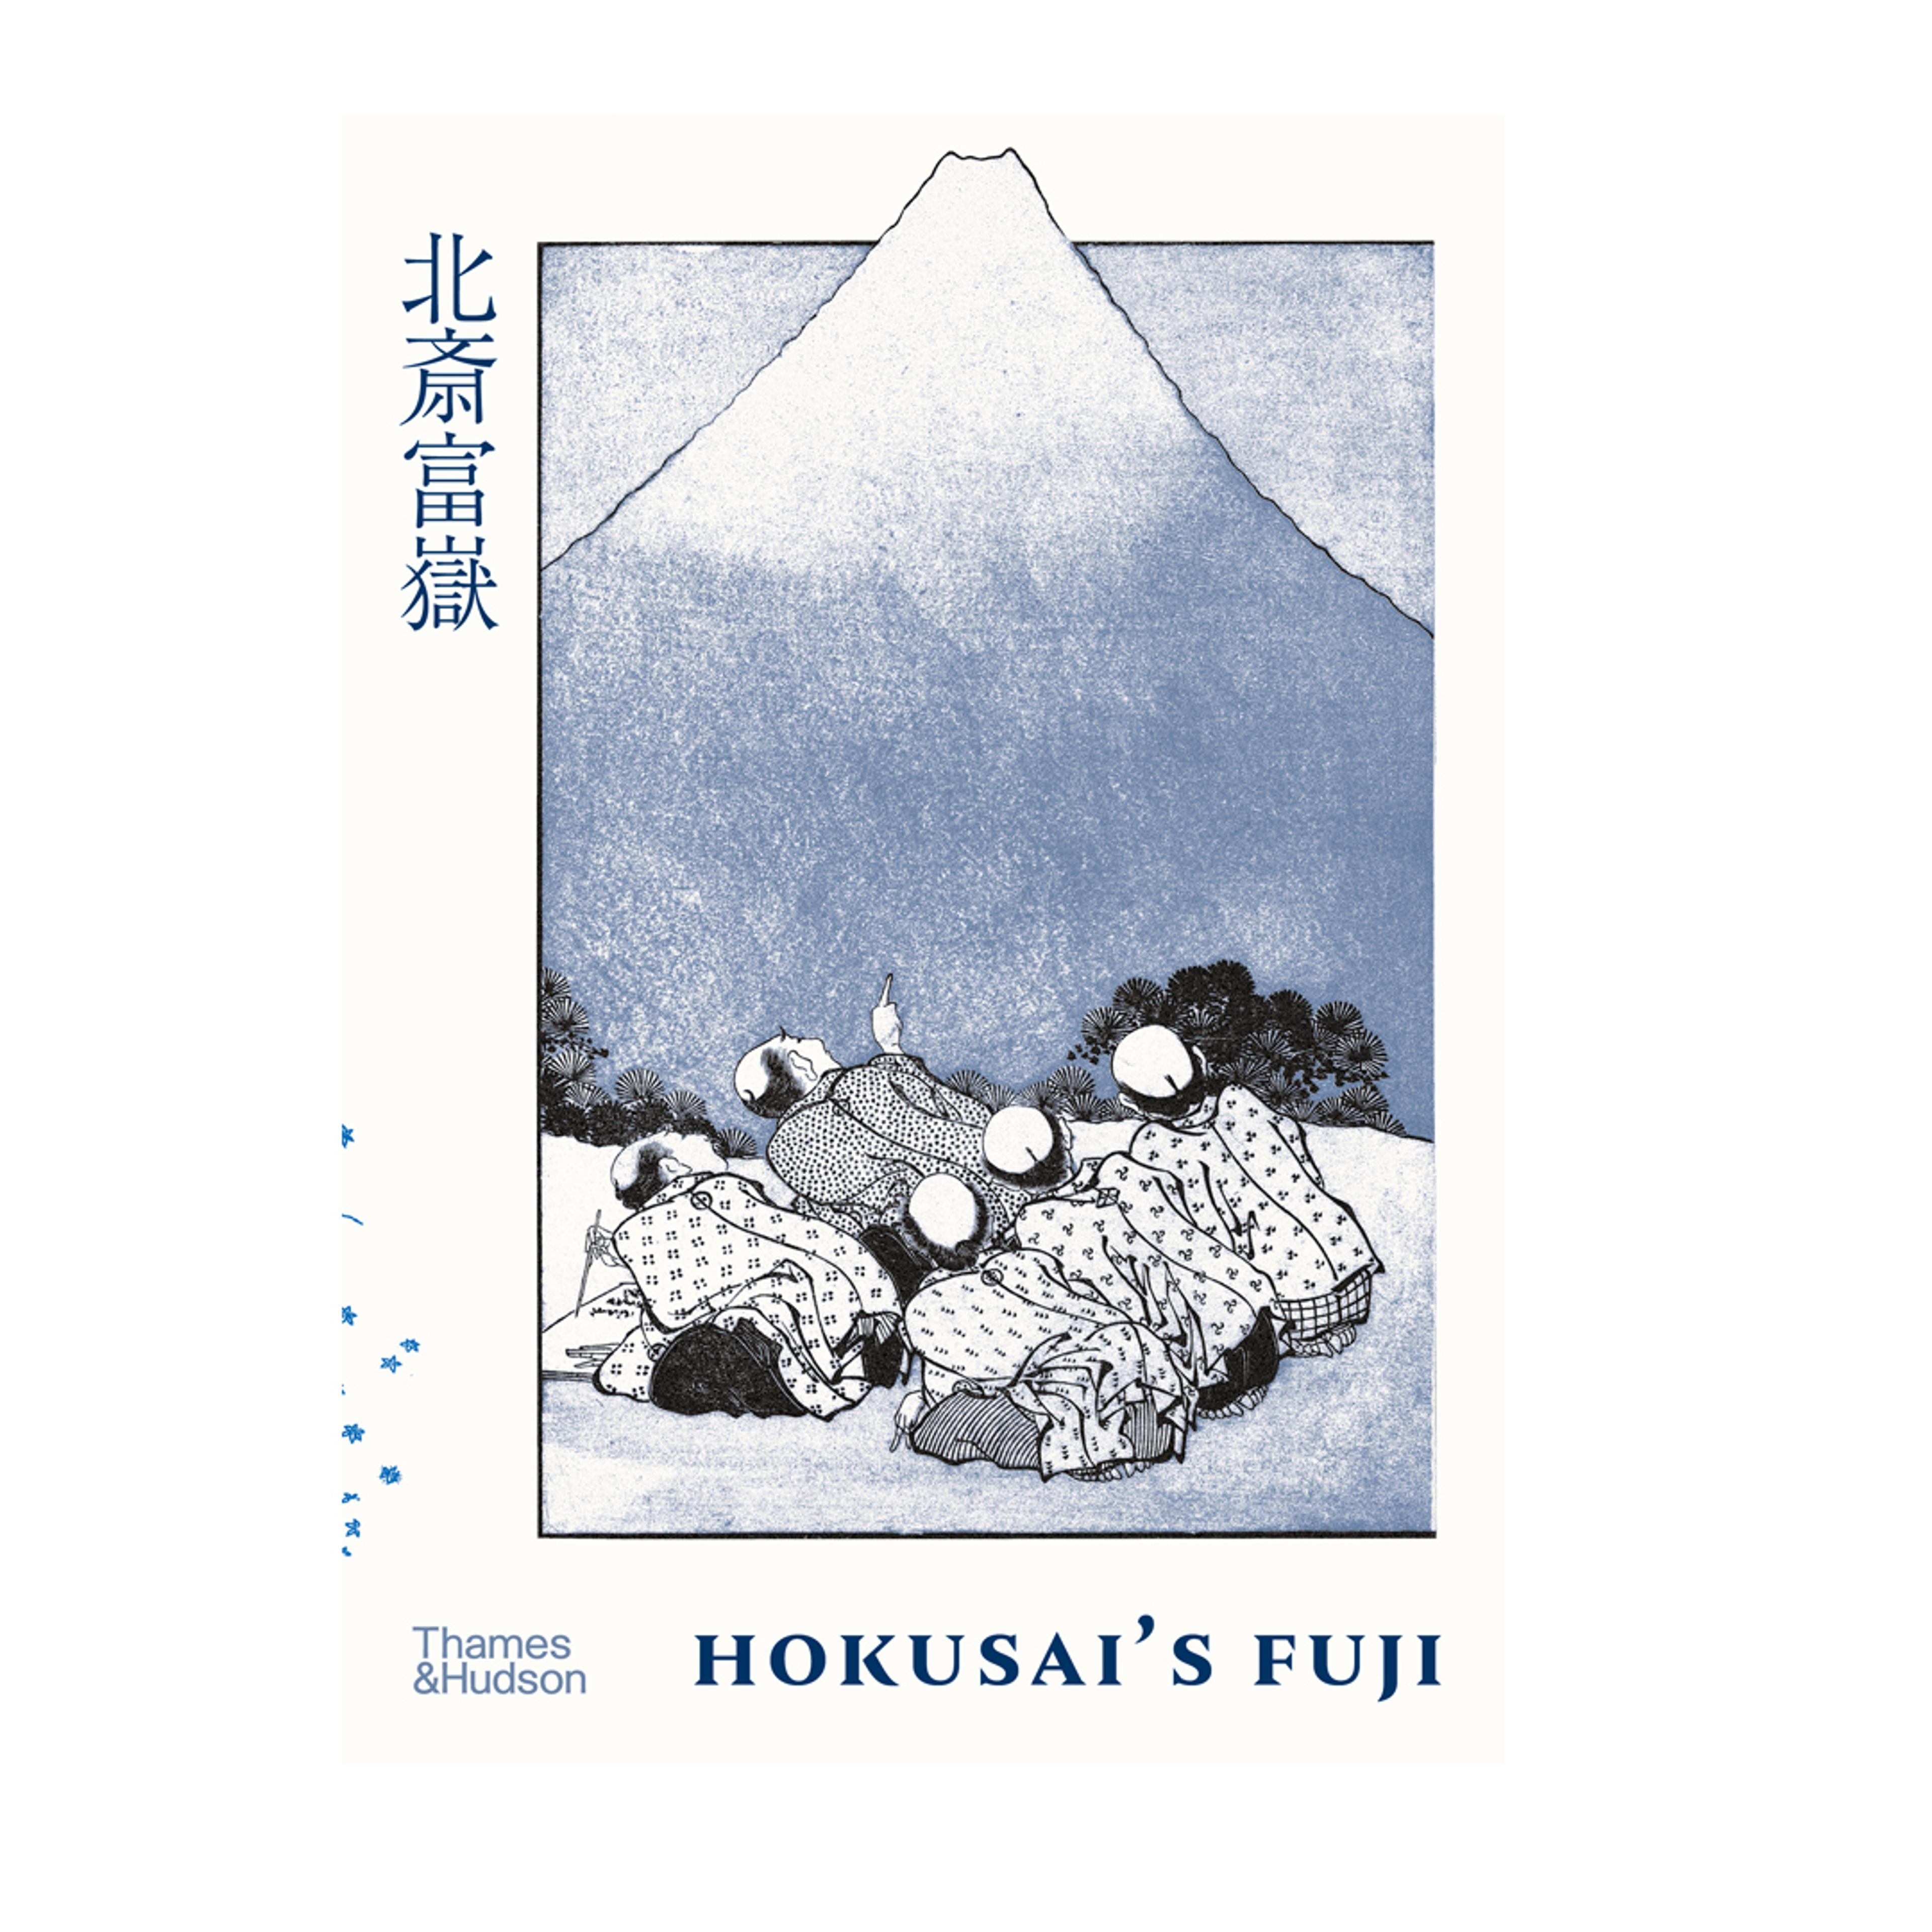 Front cover of Hokusai's Fuji, featuring an illustration of a group of kneeling figures pointing to Mount Fuji, towering in the background.